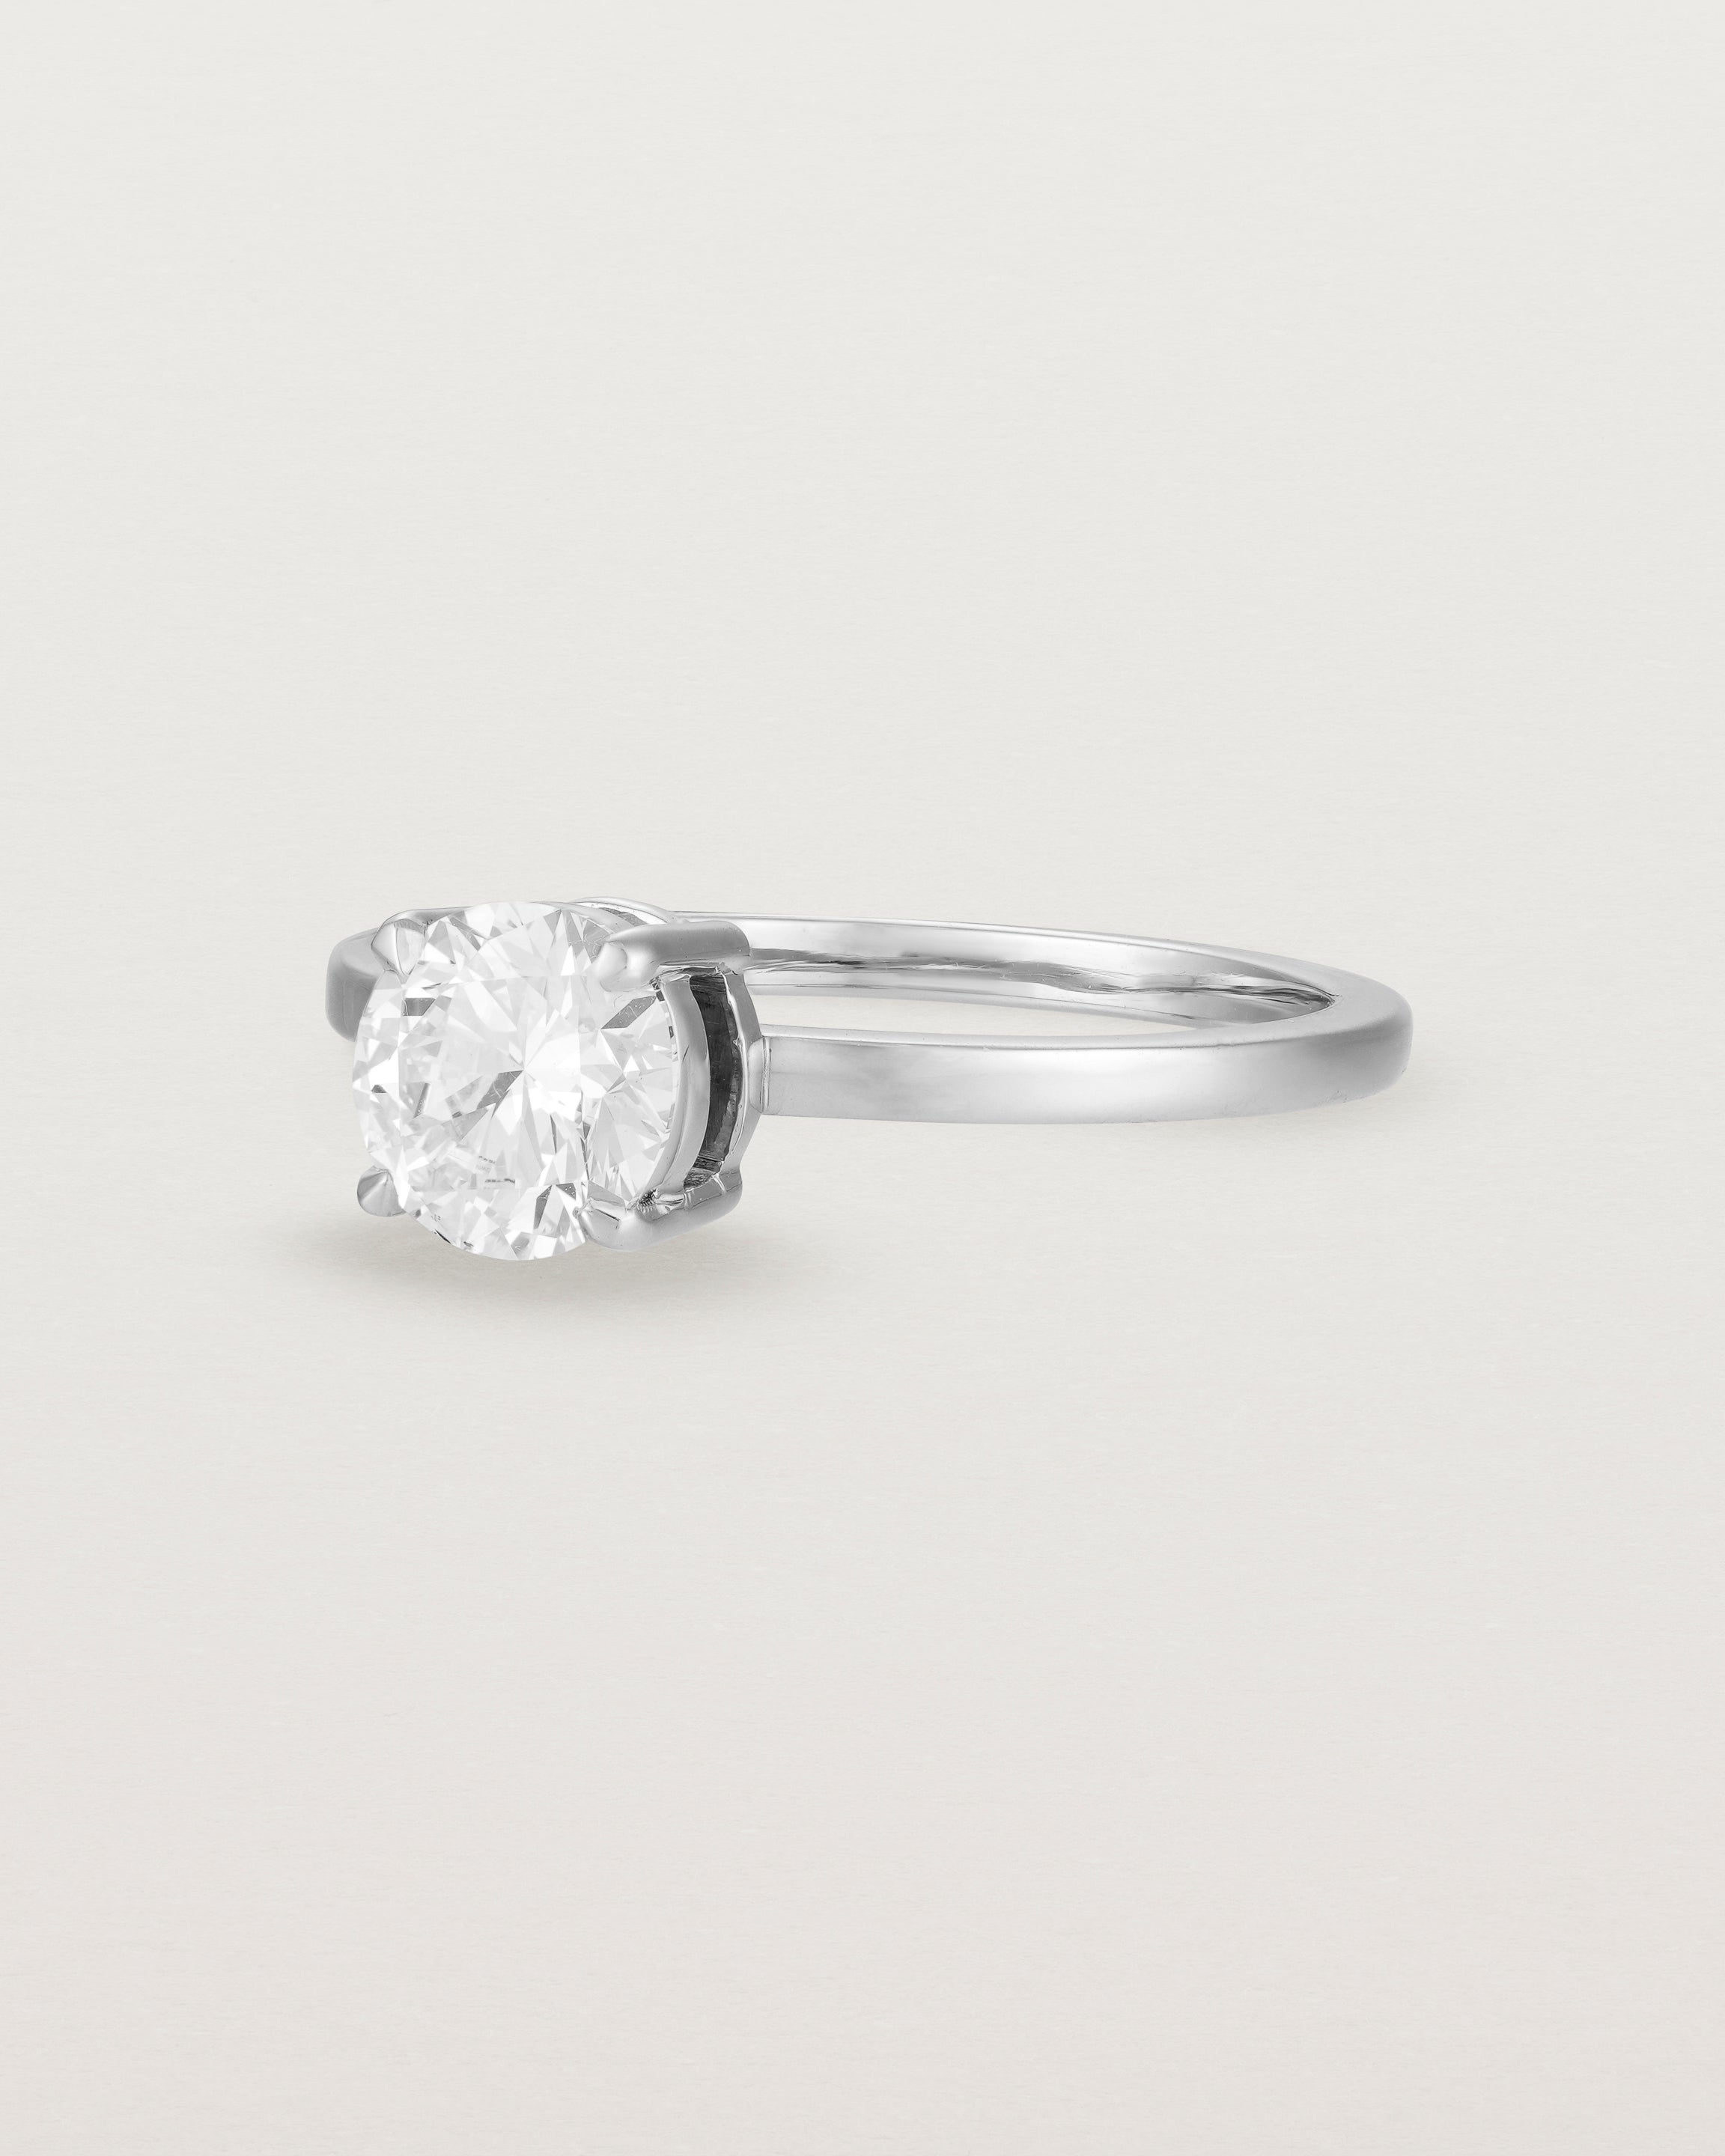 Angled view of the Petite Una Round Solitaire | Laboratory Grown Diamond | White Gold.